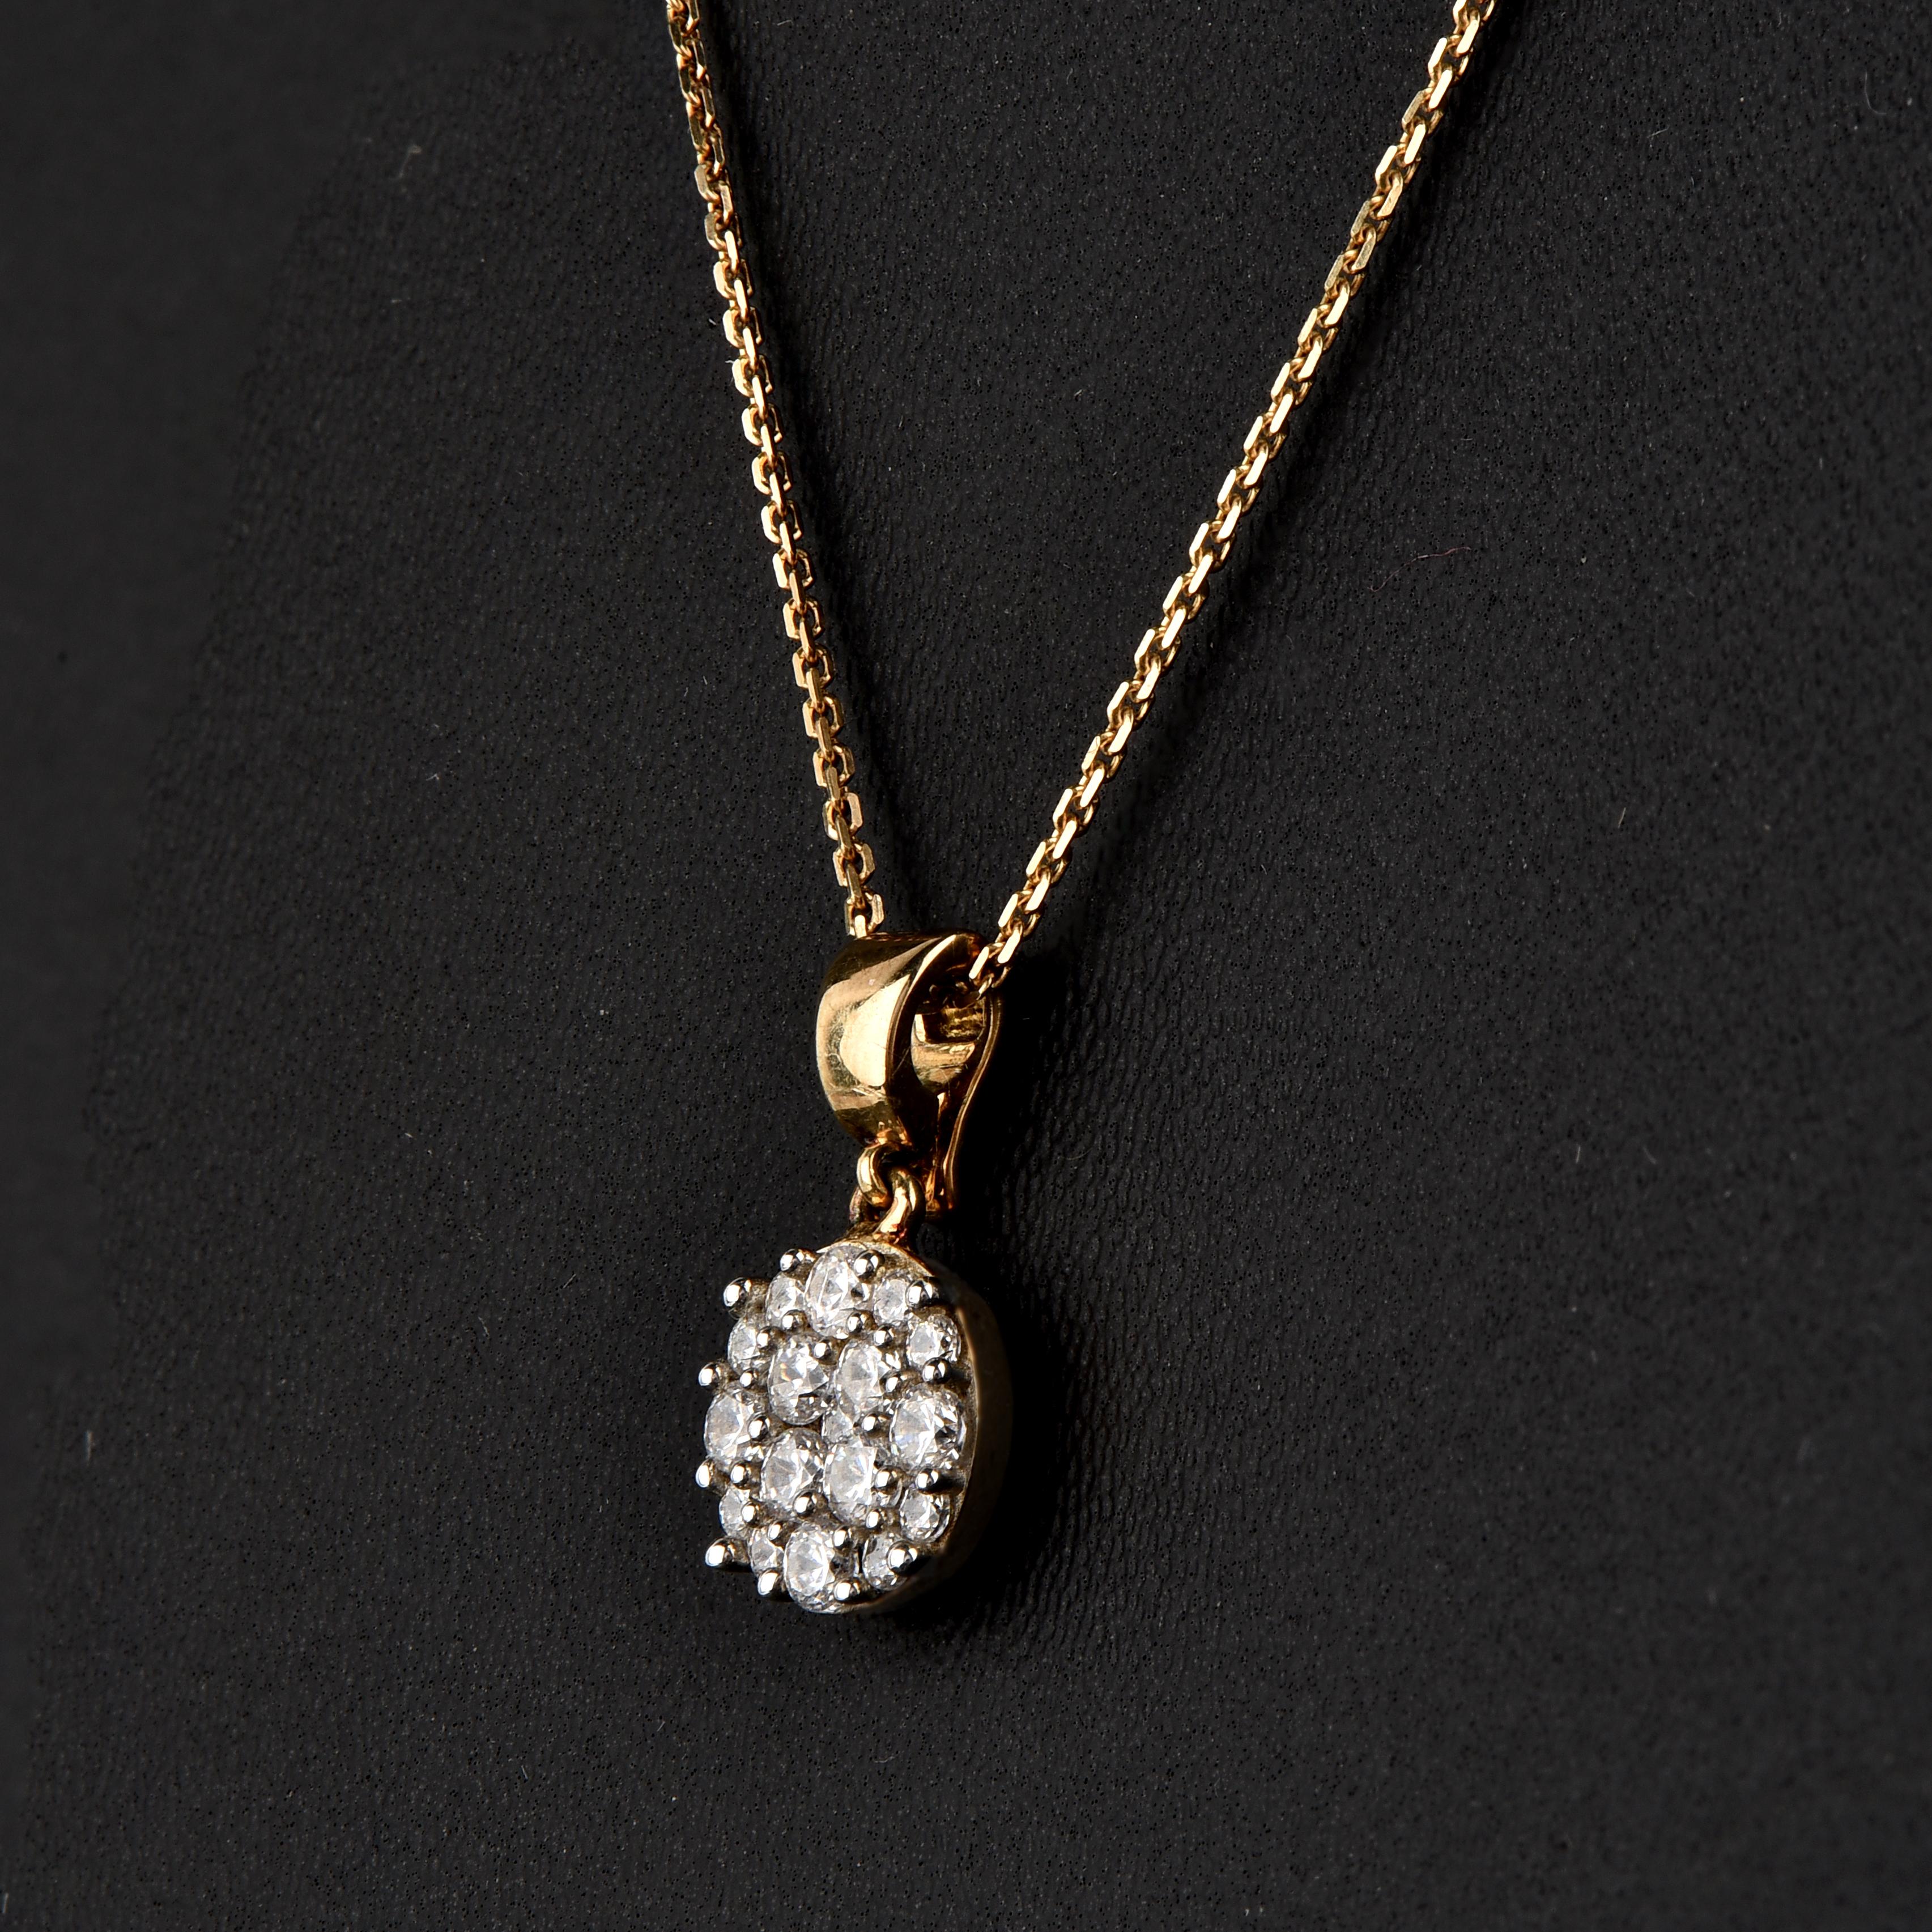 Embrace yourself with this breath-taking diamond studded pendant that is ready to make you shine. The pendant is crafted from 18-karat Yellow gold and features Round Brilliant 17 white diamonds, Pressure set, H-I color I1 clarity and a high polish